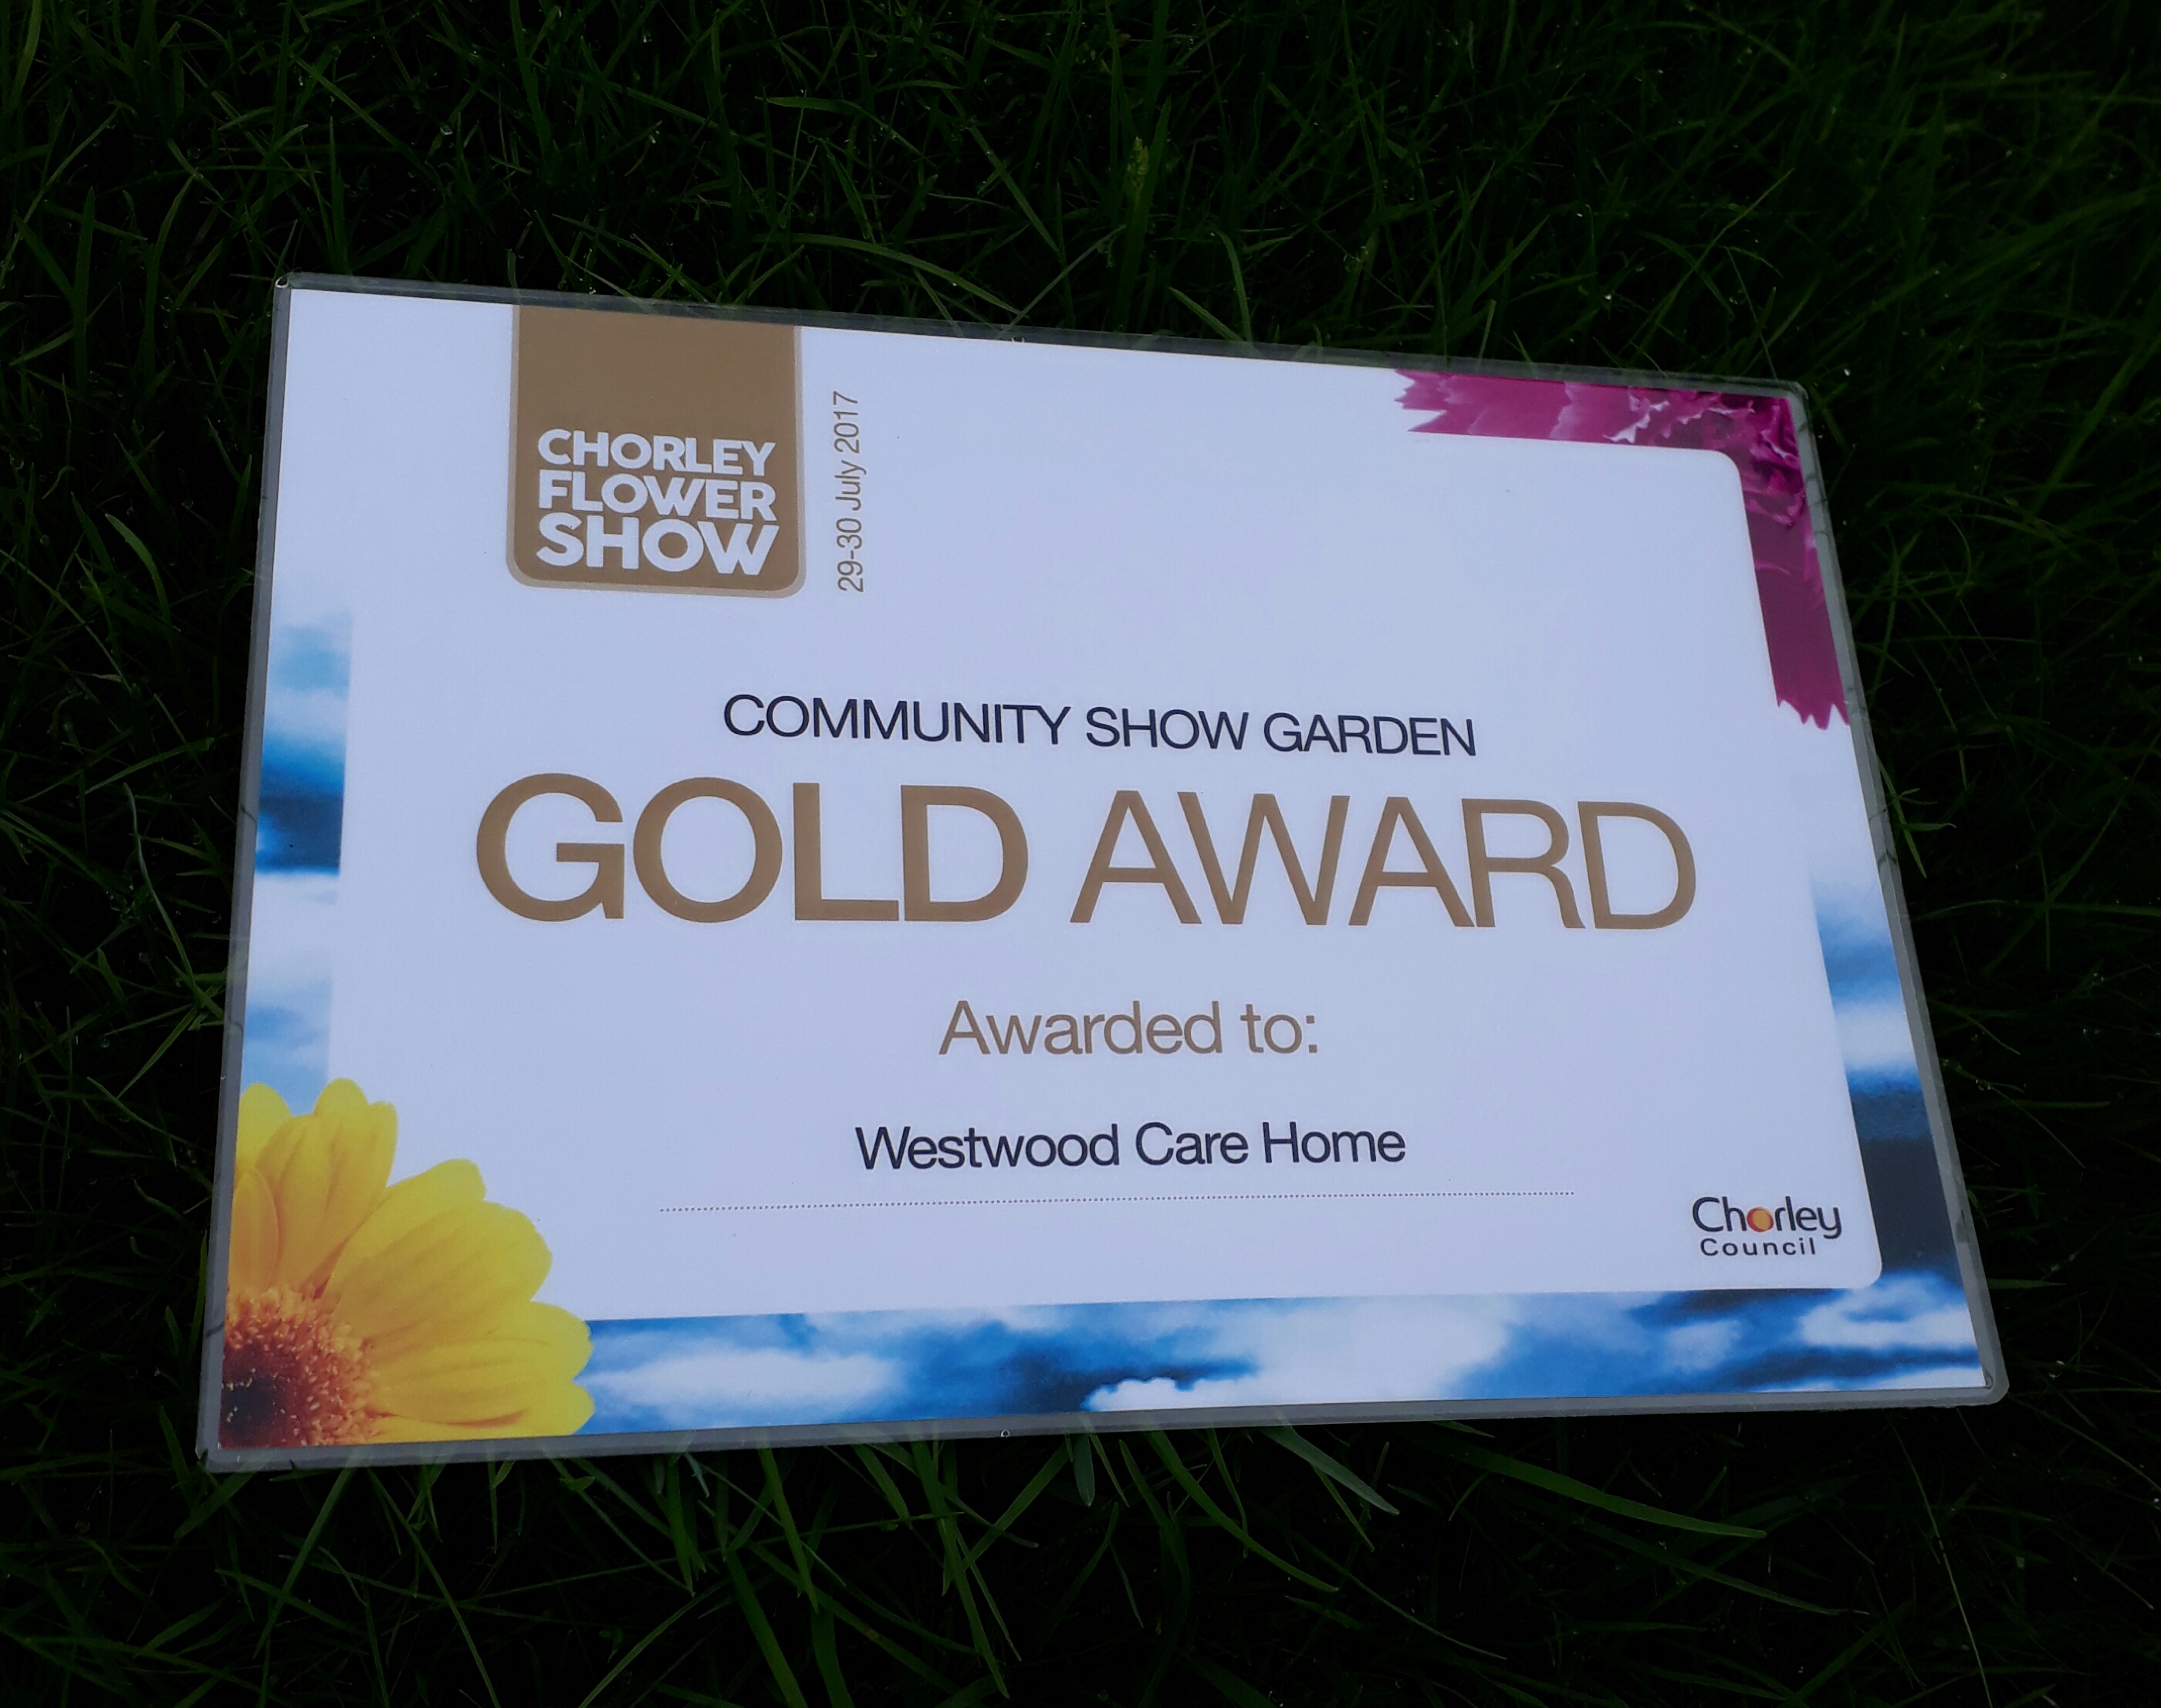 Our Gold Award from the Chorley Flower Show 2017